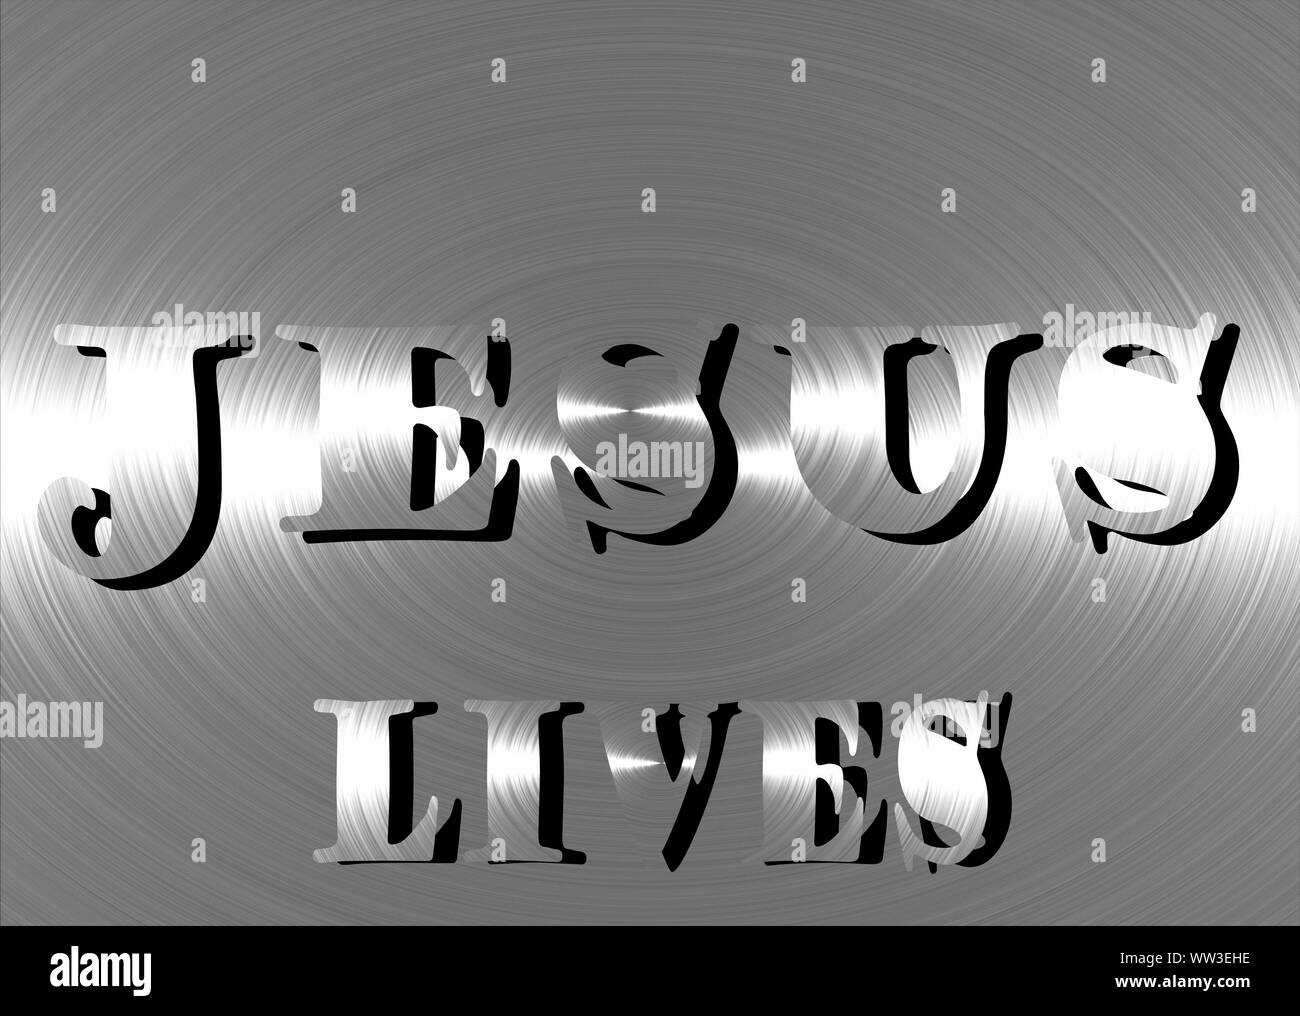 Jesus lives, Jesus saves and the icthus fish the sign for believers Stock Photo